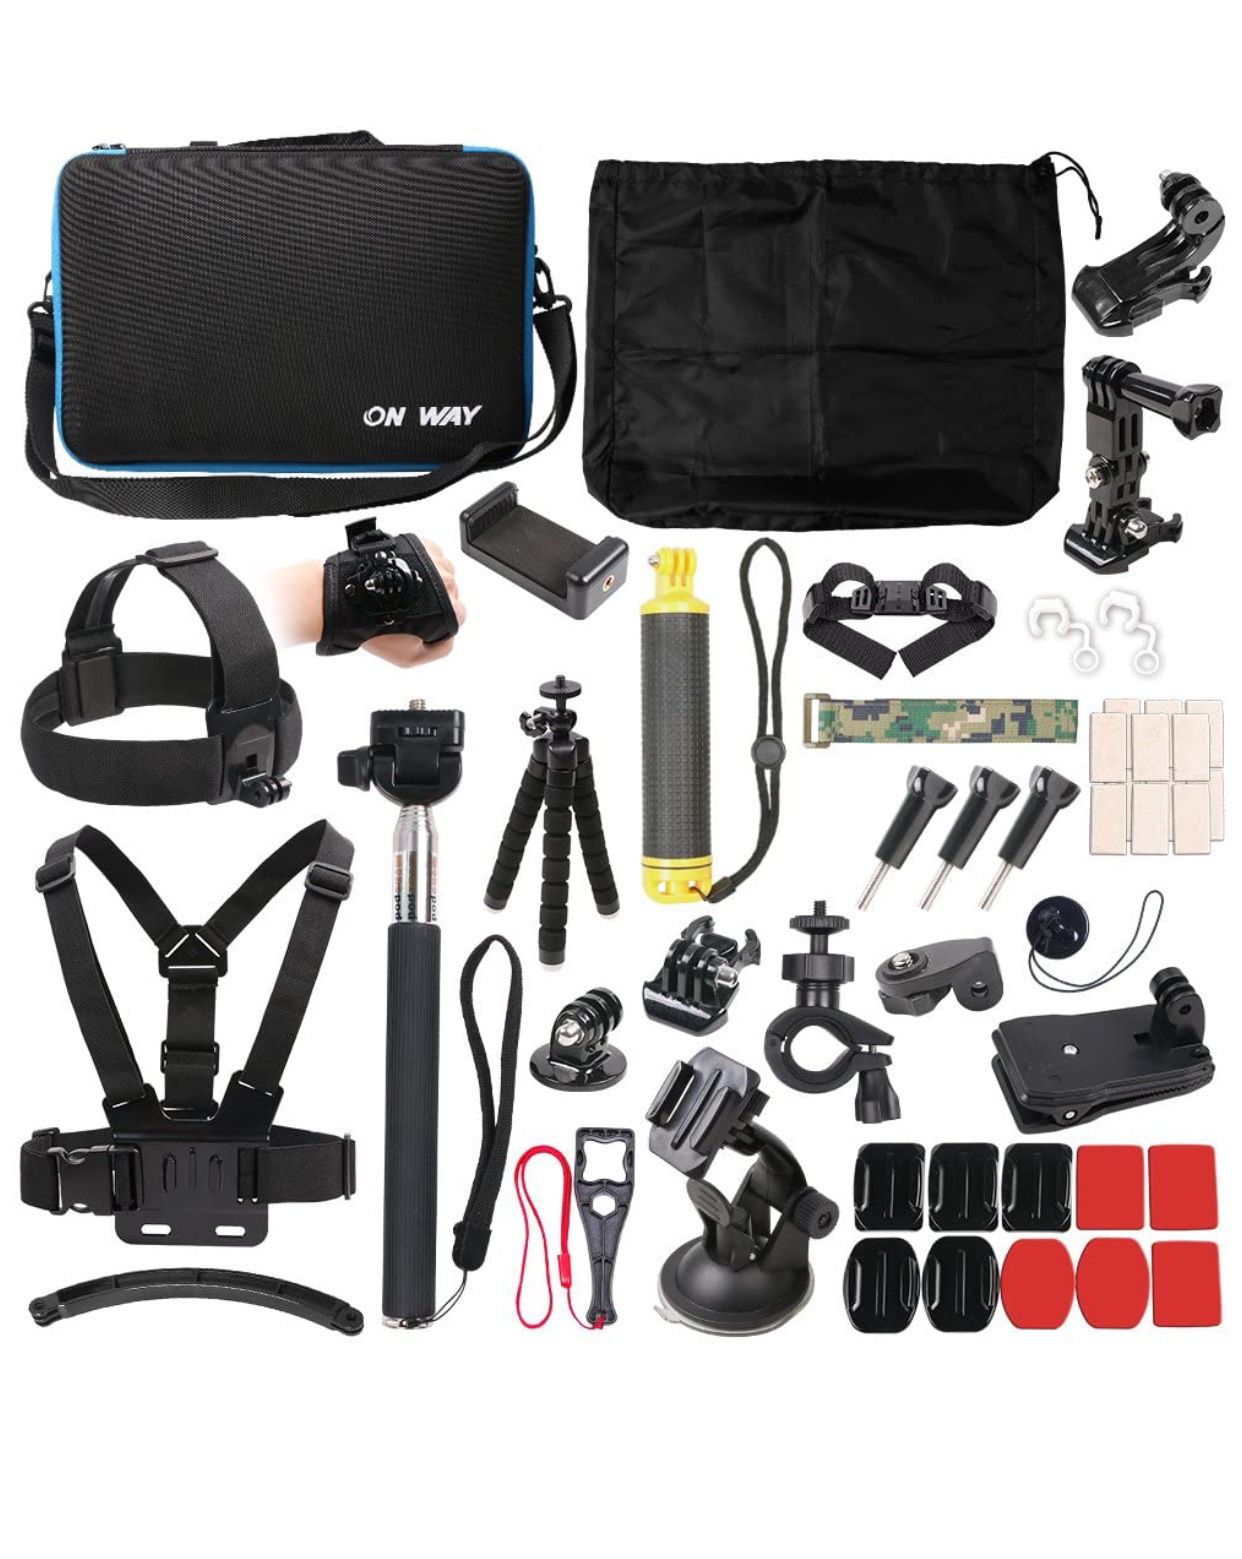 50in1 accesoriess for Gopro Hero+9876543